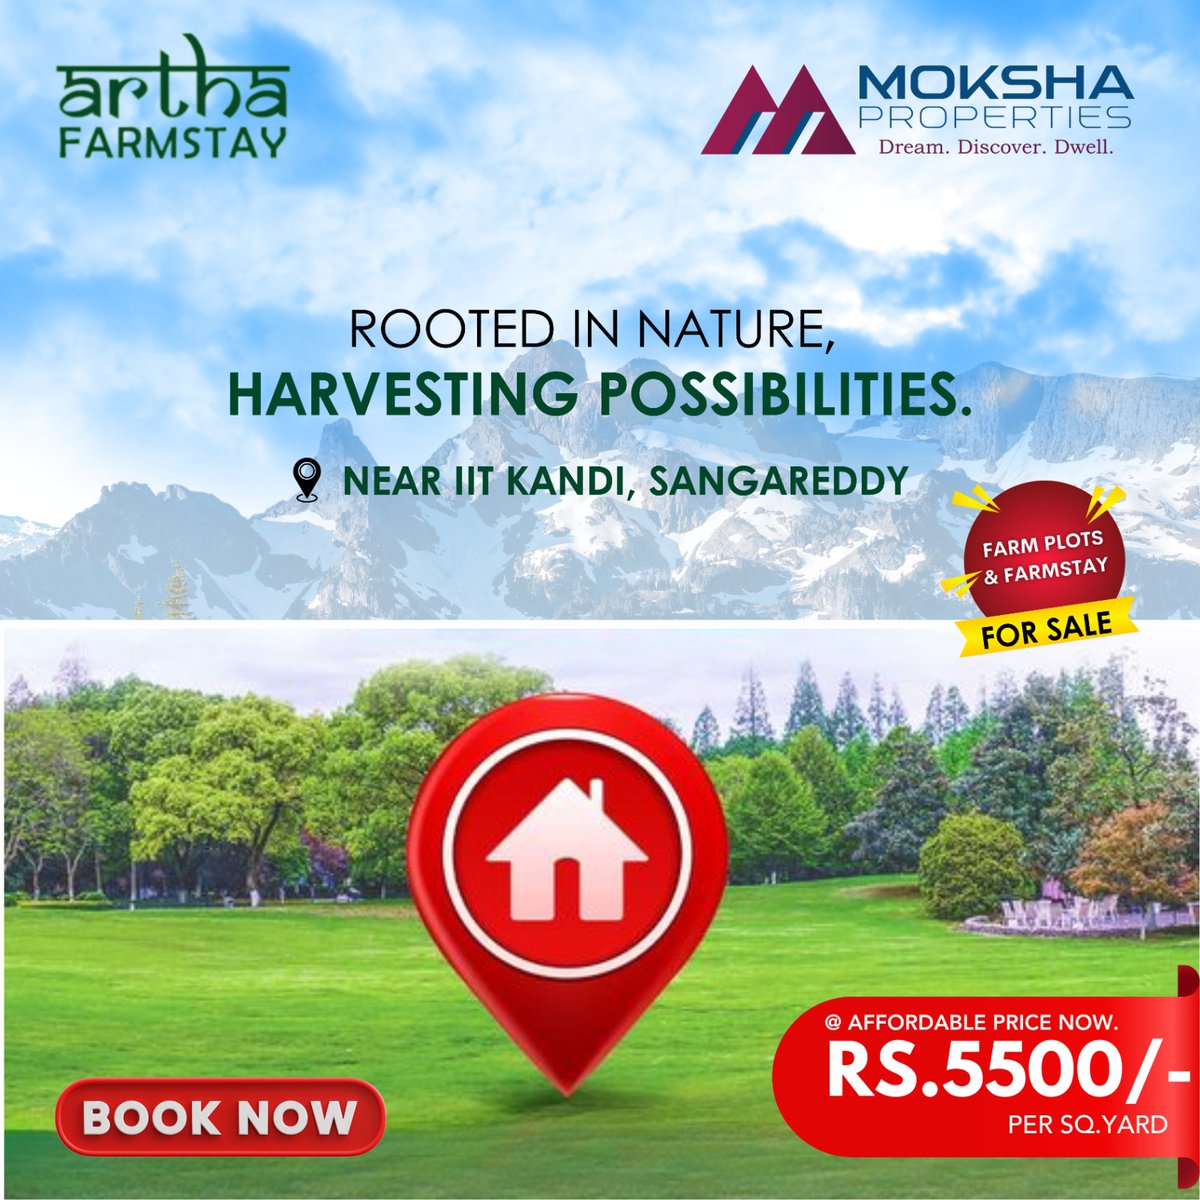 🌾 Embrace the beauty of rural living with farm plots and farmstay for sale near IIT Kandi, Sangareddy, brought to you by Moksha Properties! 

#MokshaProperties #FarmPlotsForSale #RuralLiving #AffordablePrices #Sangareddy #AffordableLuxury #residentialplotsforsalenearme #openland